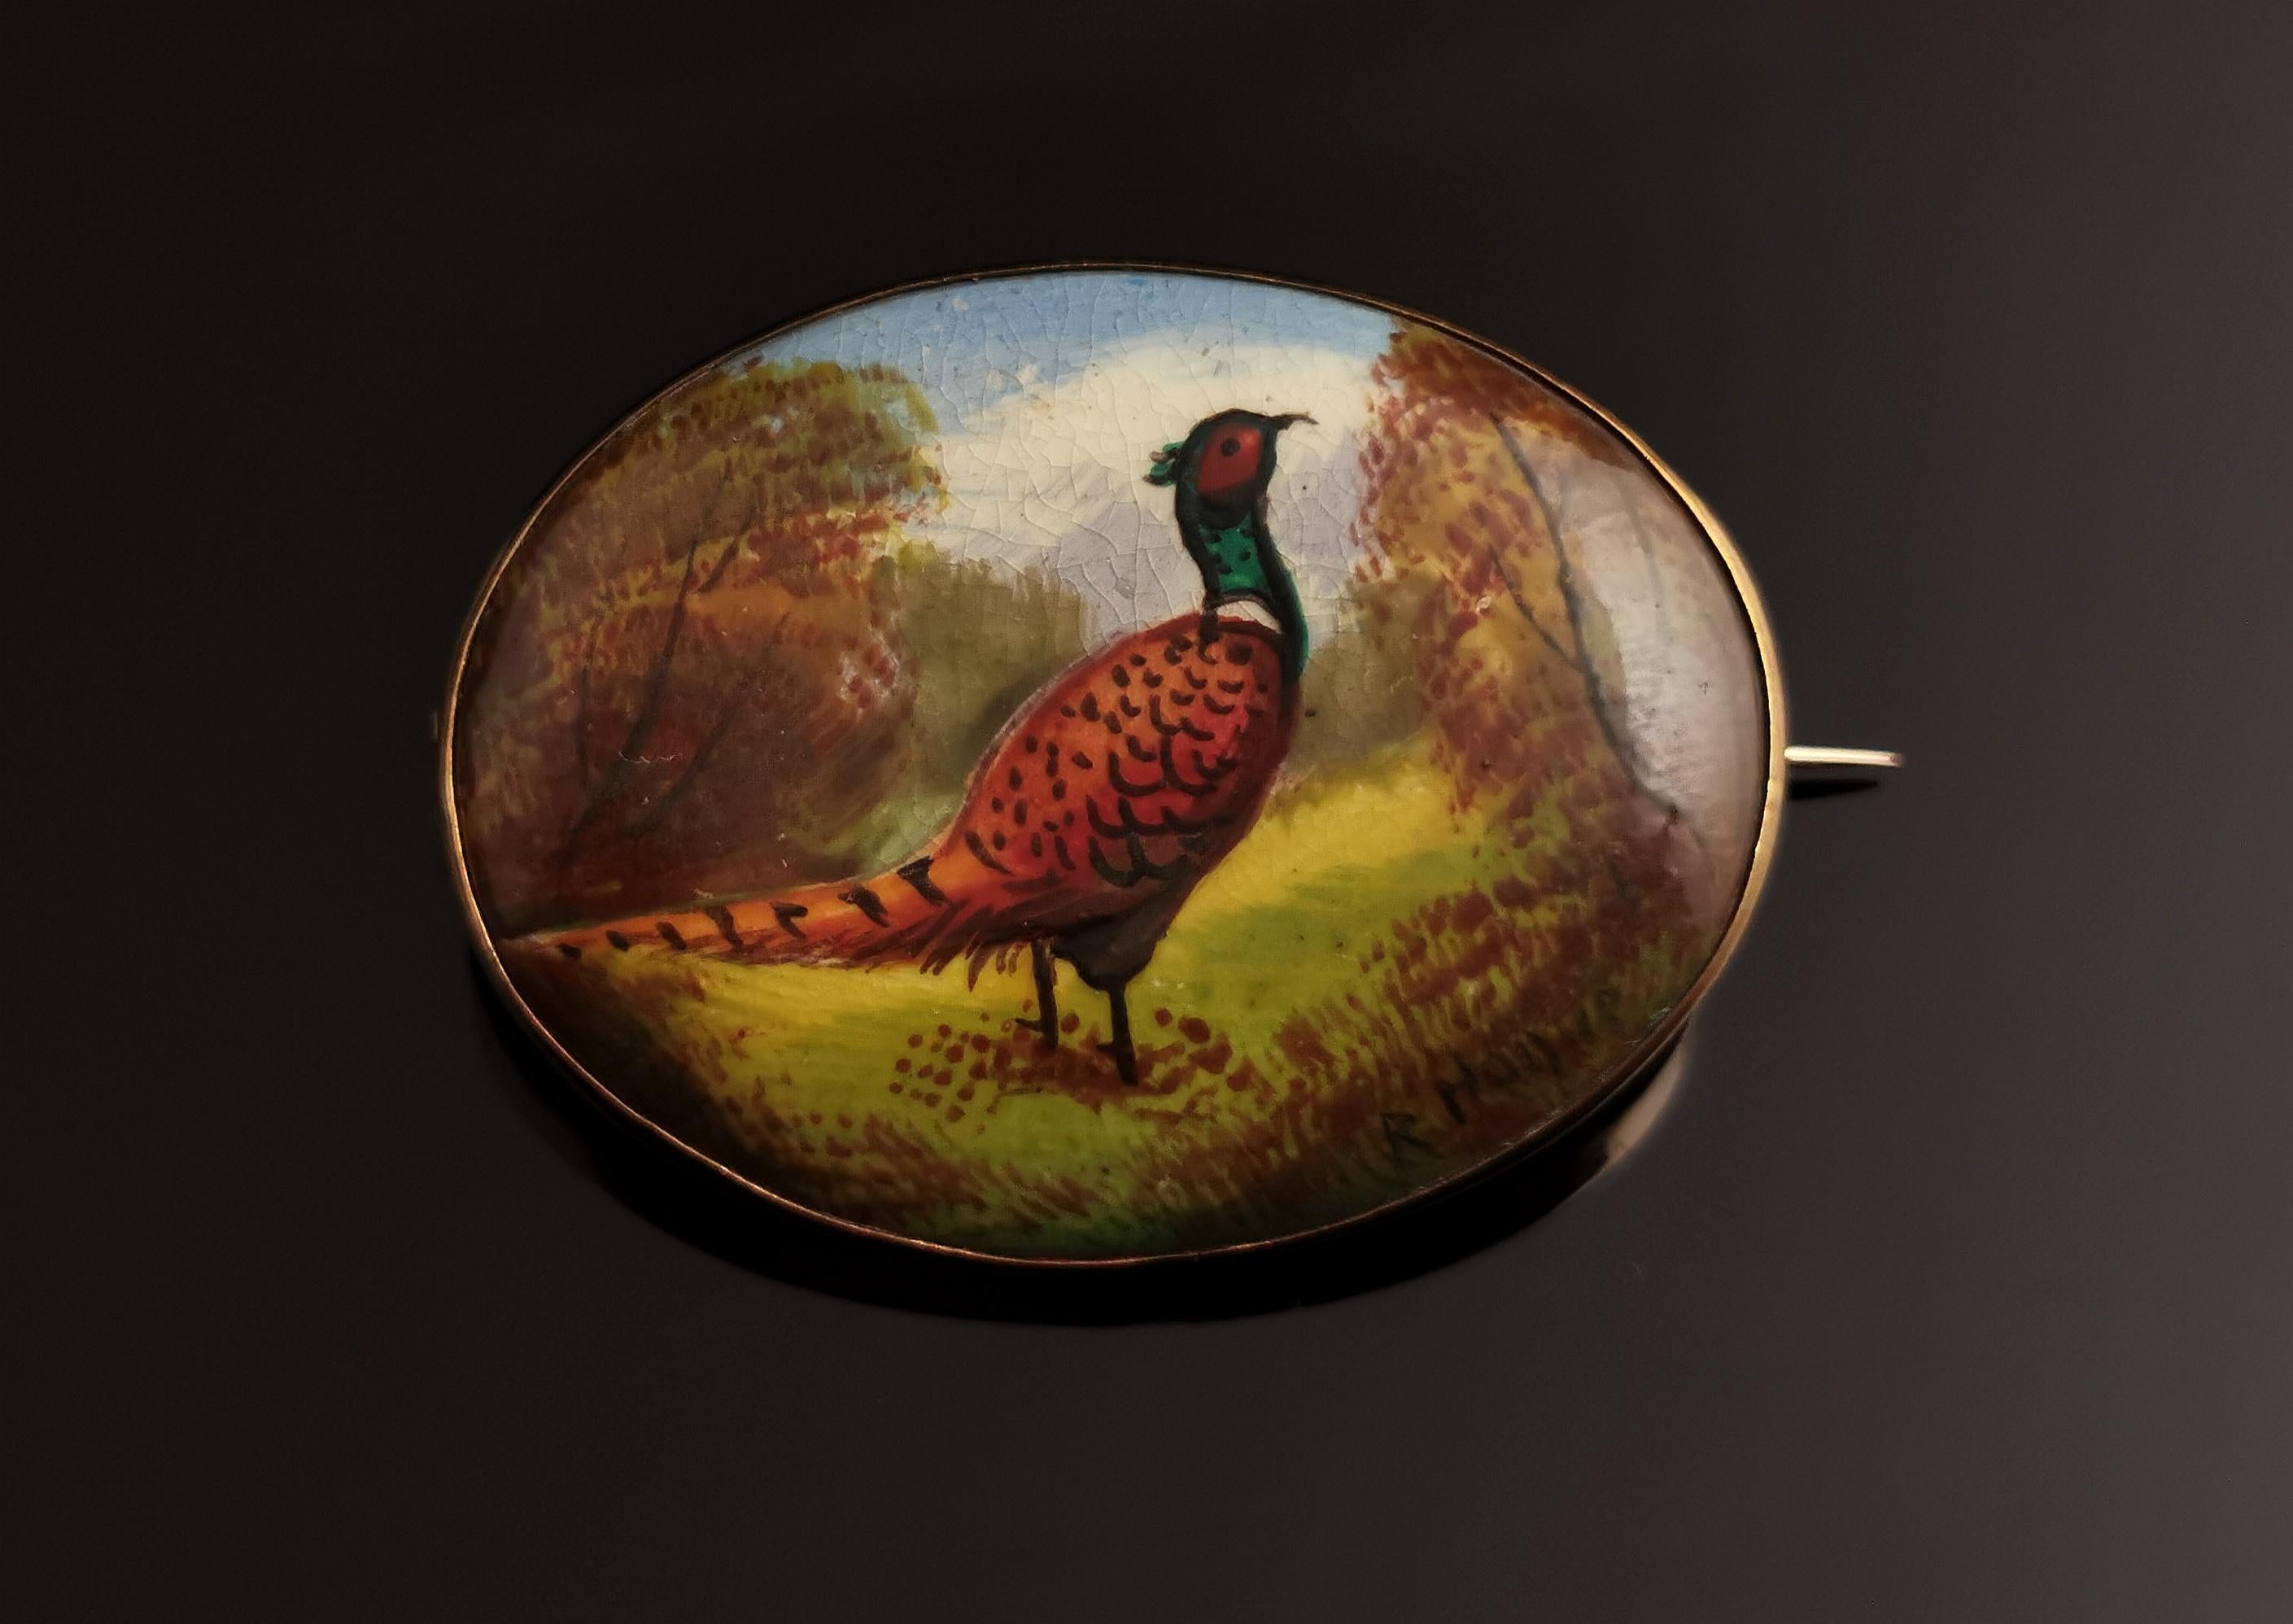 A rare antique early 20th century Minton brooch painted and enamelled by Reuben Hague.

The brooch is made from ceramic and has been finely hand enamelled with a pheasant in a wood.

This highly detailed and beautiful piece is set into a gilt bezel